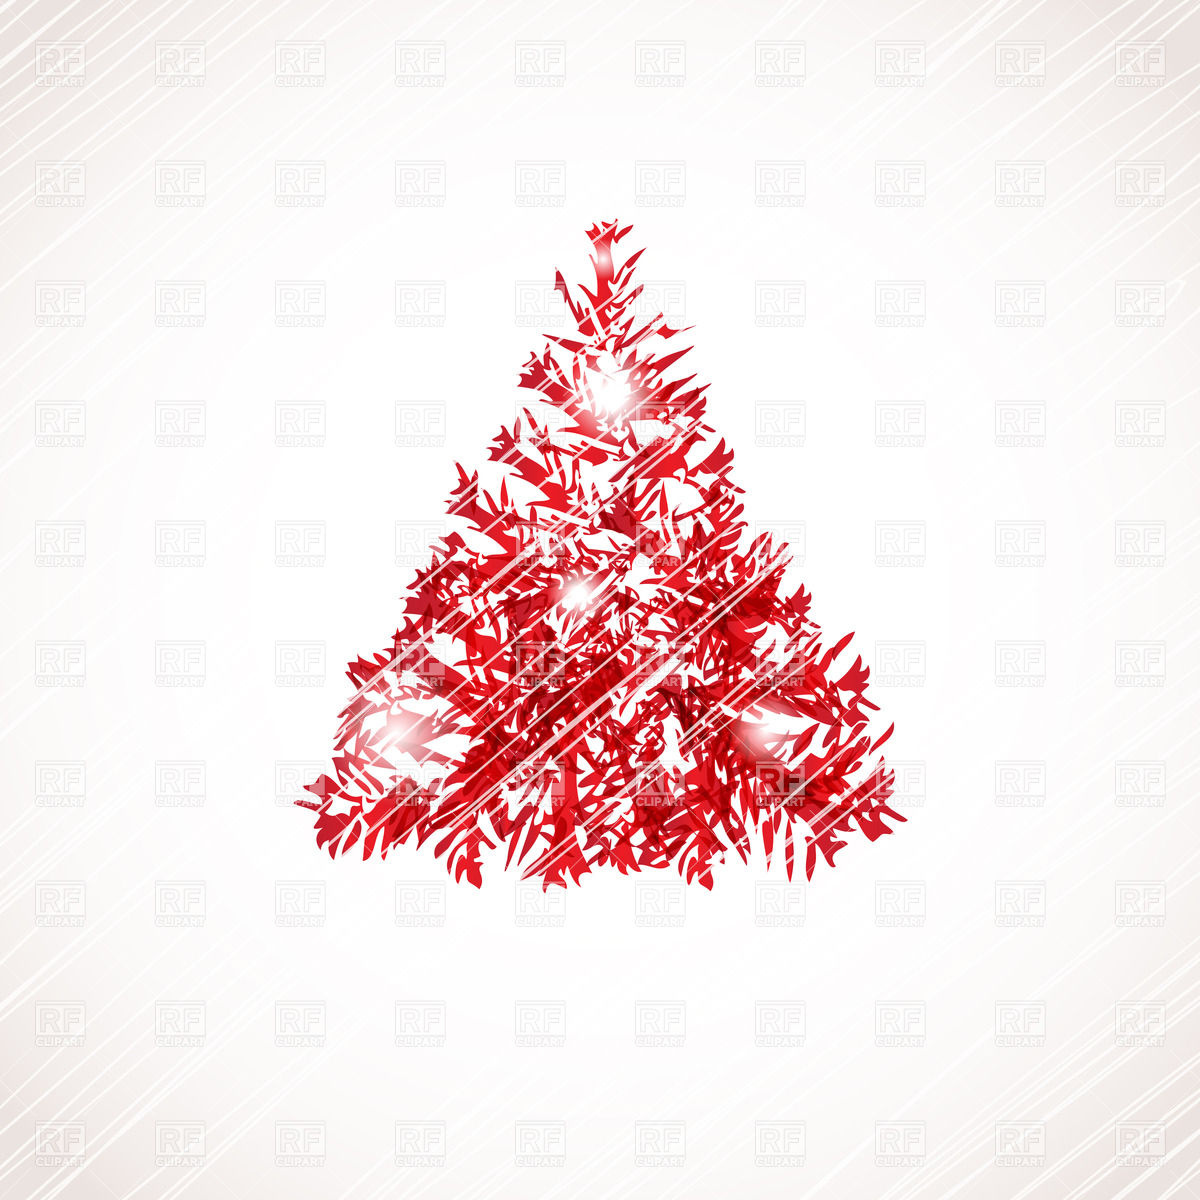 Stylized Red Christmas Tree On Scratchy Background 22599 Backgrounds